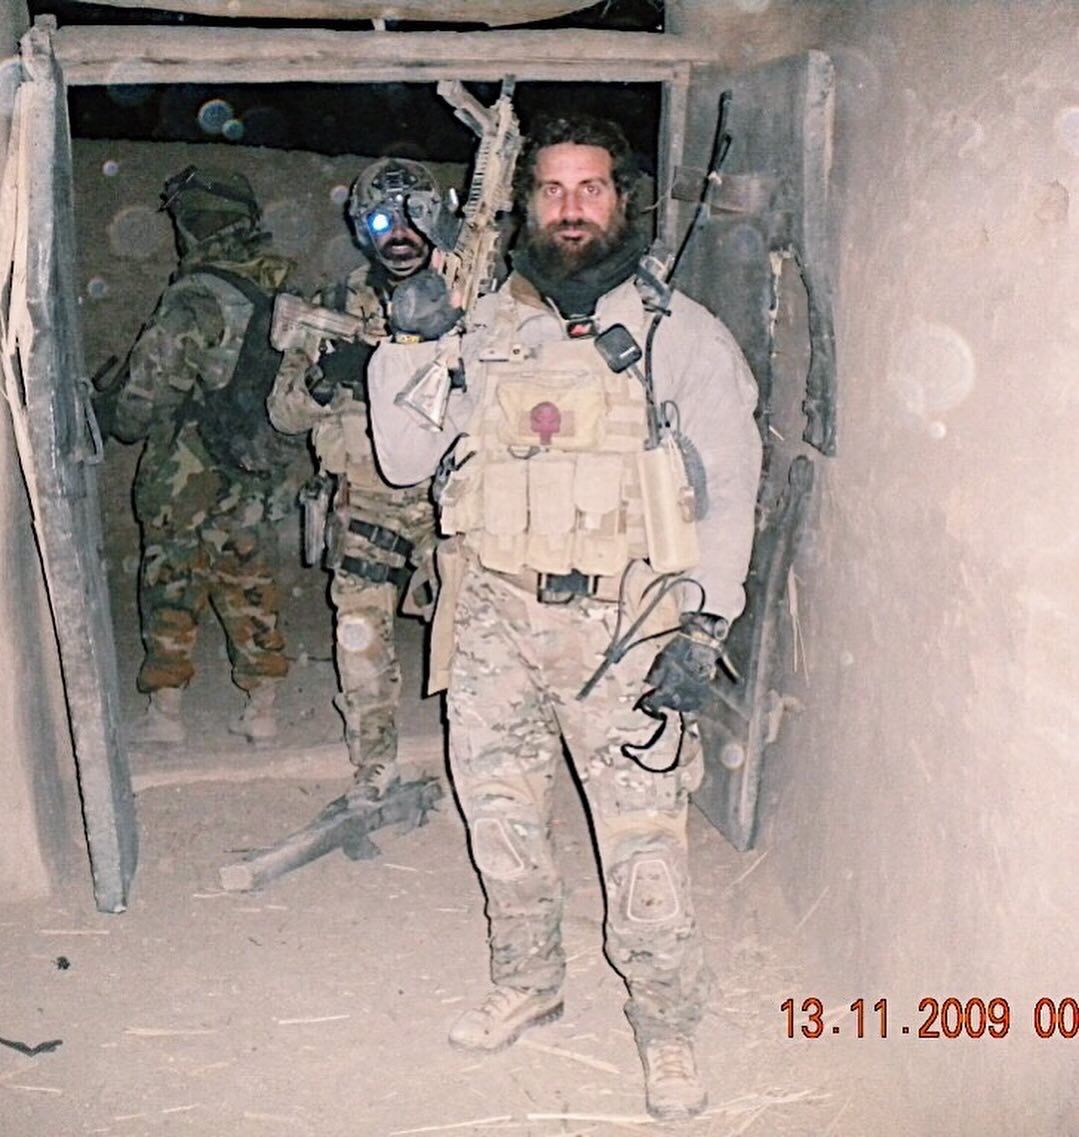 Courage is not the absence of fear, it is the will to face it

#SSGMATTHEWPUCINO #greenberet #Blackbeard #5THSFG #20thSFG #ODA2223 #Warrior #Hero #neverforgotten